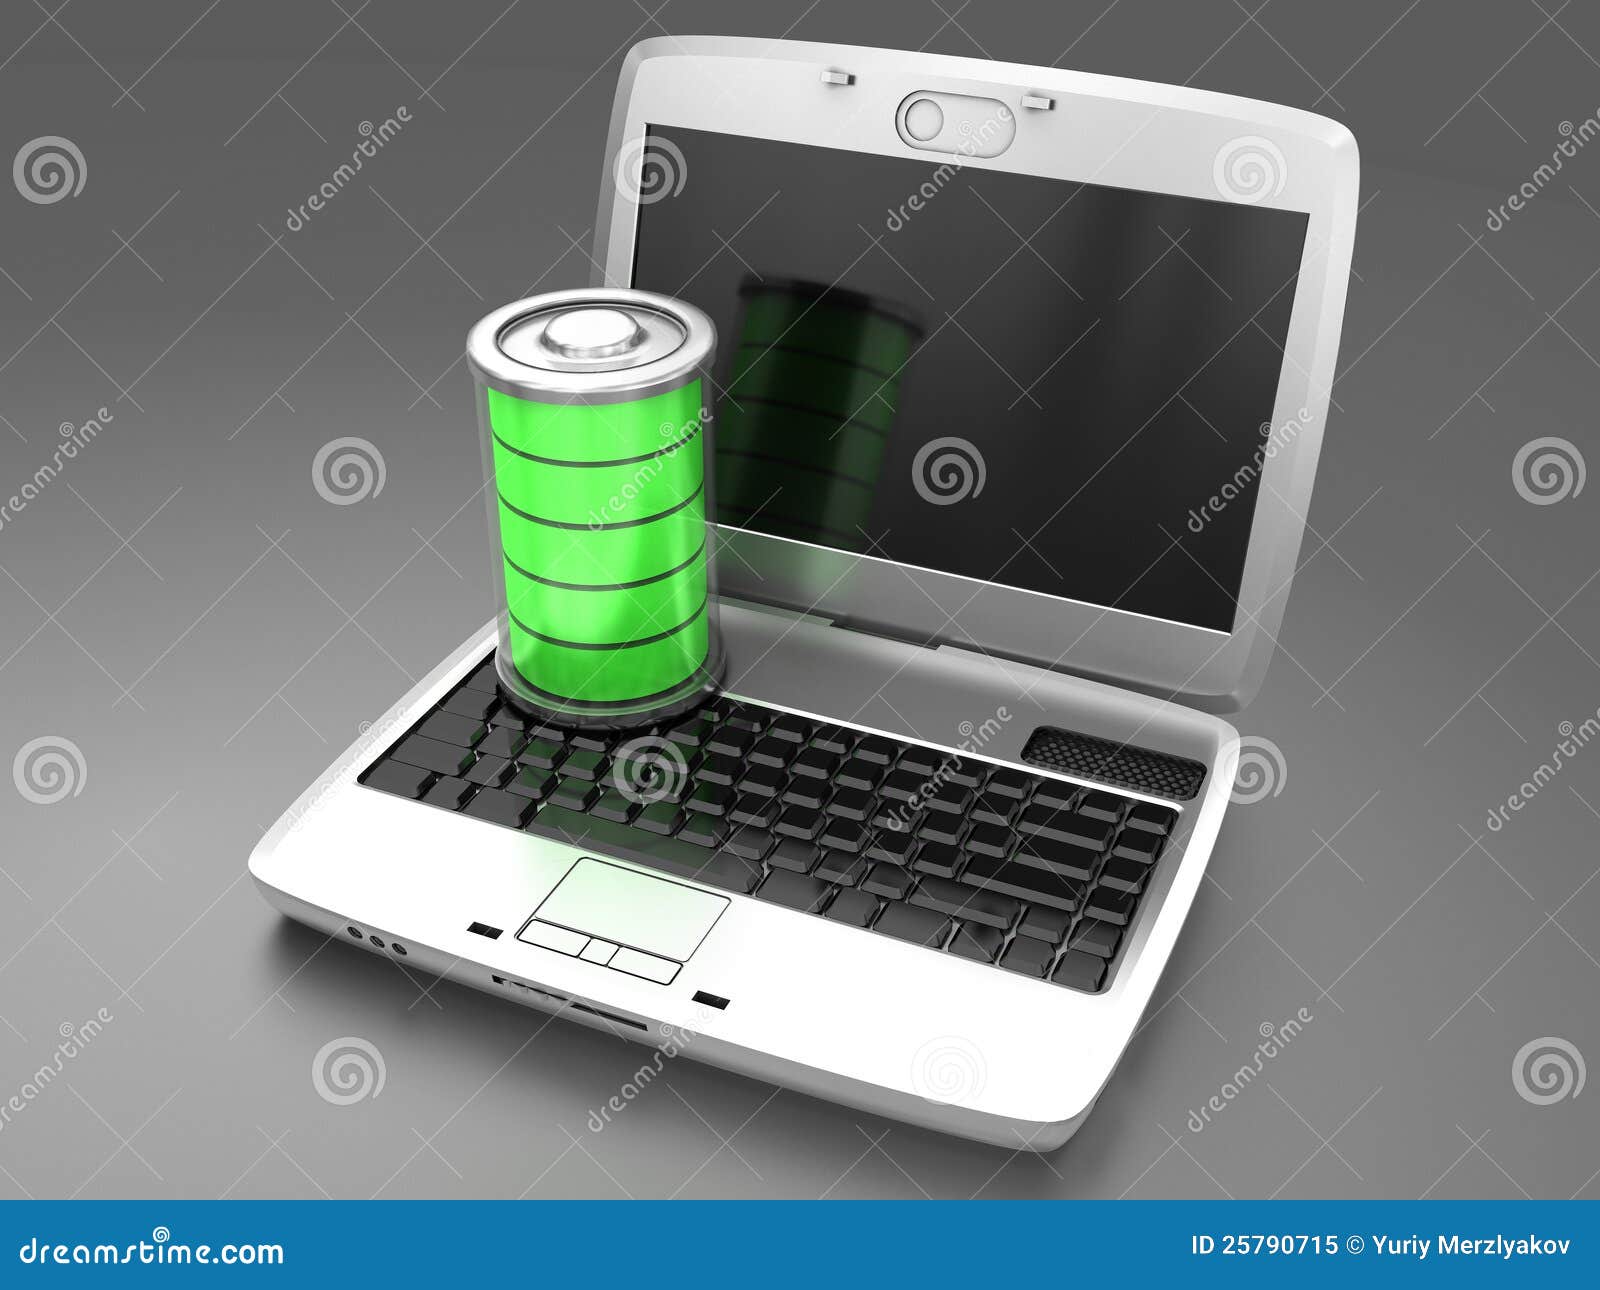 Battery charging in a laptop - Computer generated image (3d render).